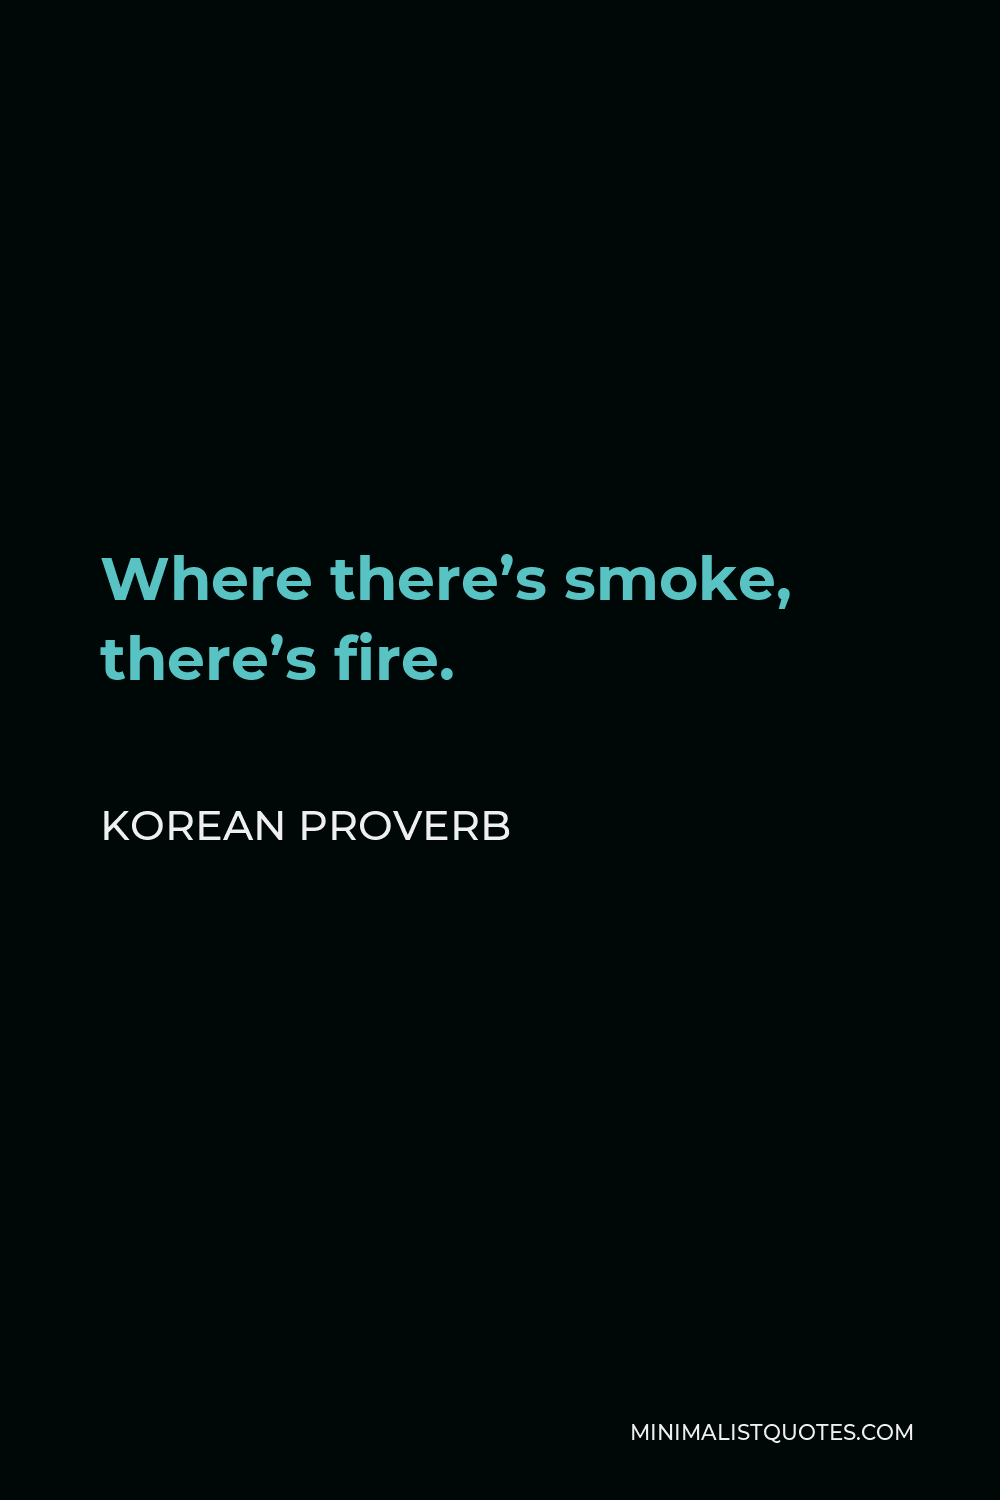 Korean Proverb Quote - Where there’s smoke, there’s fire.